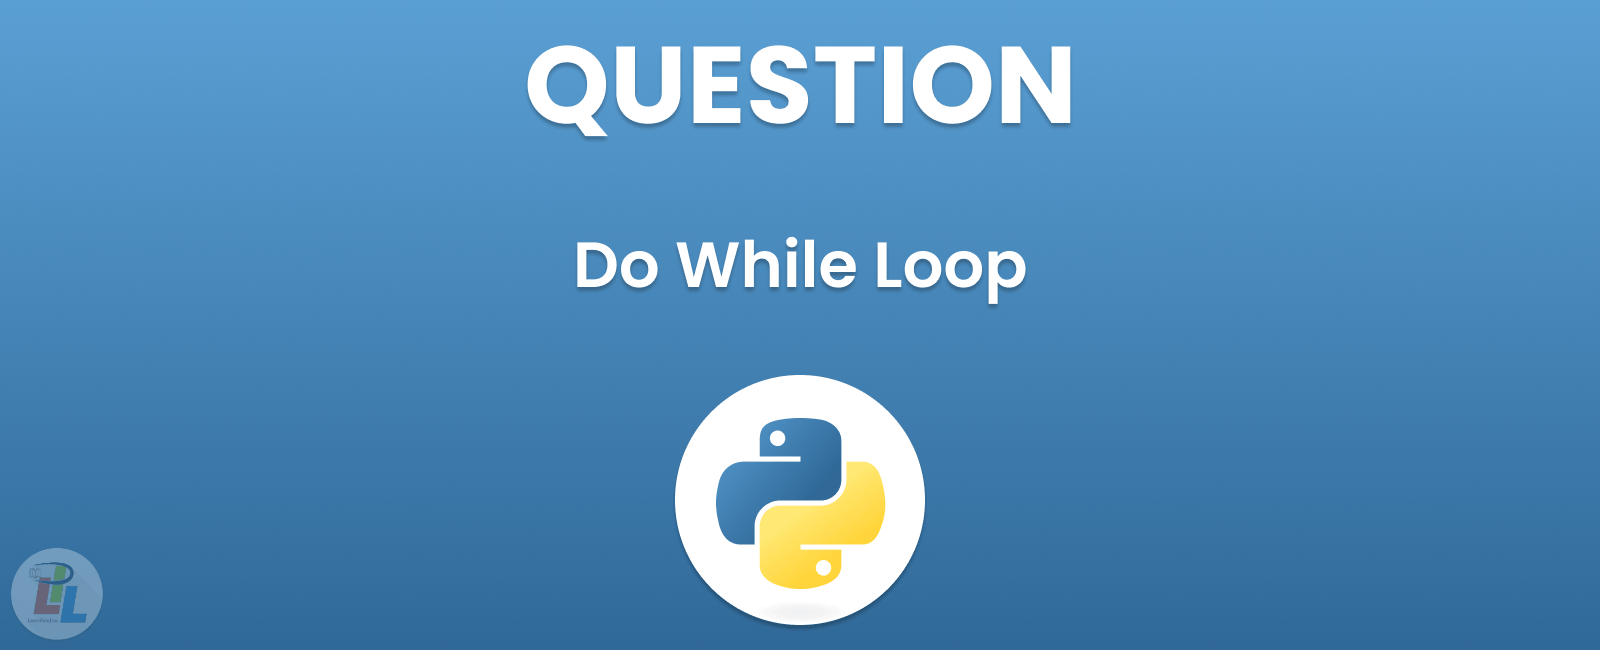 Do While Python - A Guide to Using the Do-While Loop